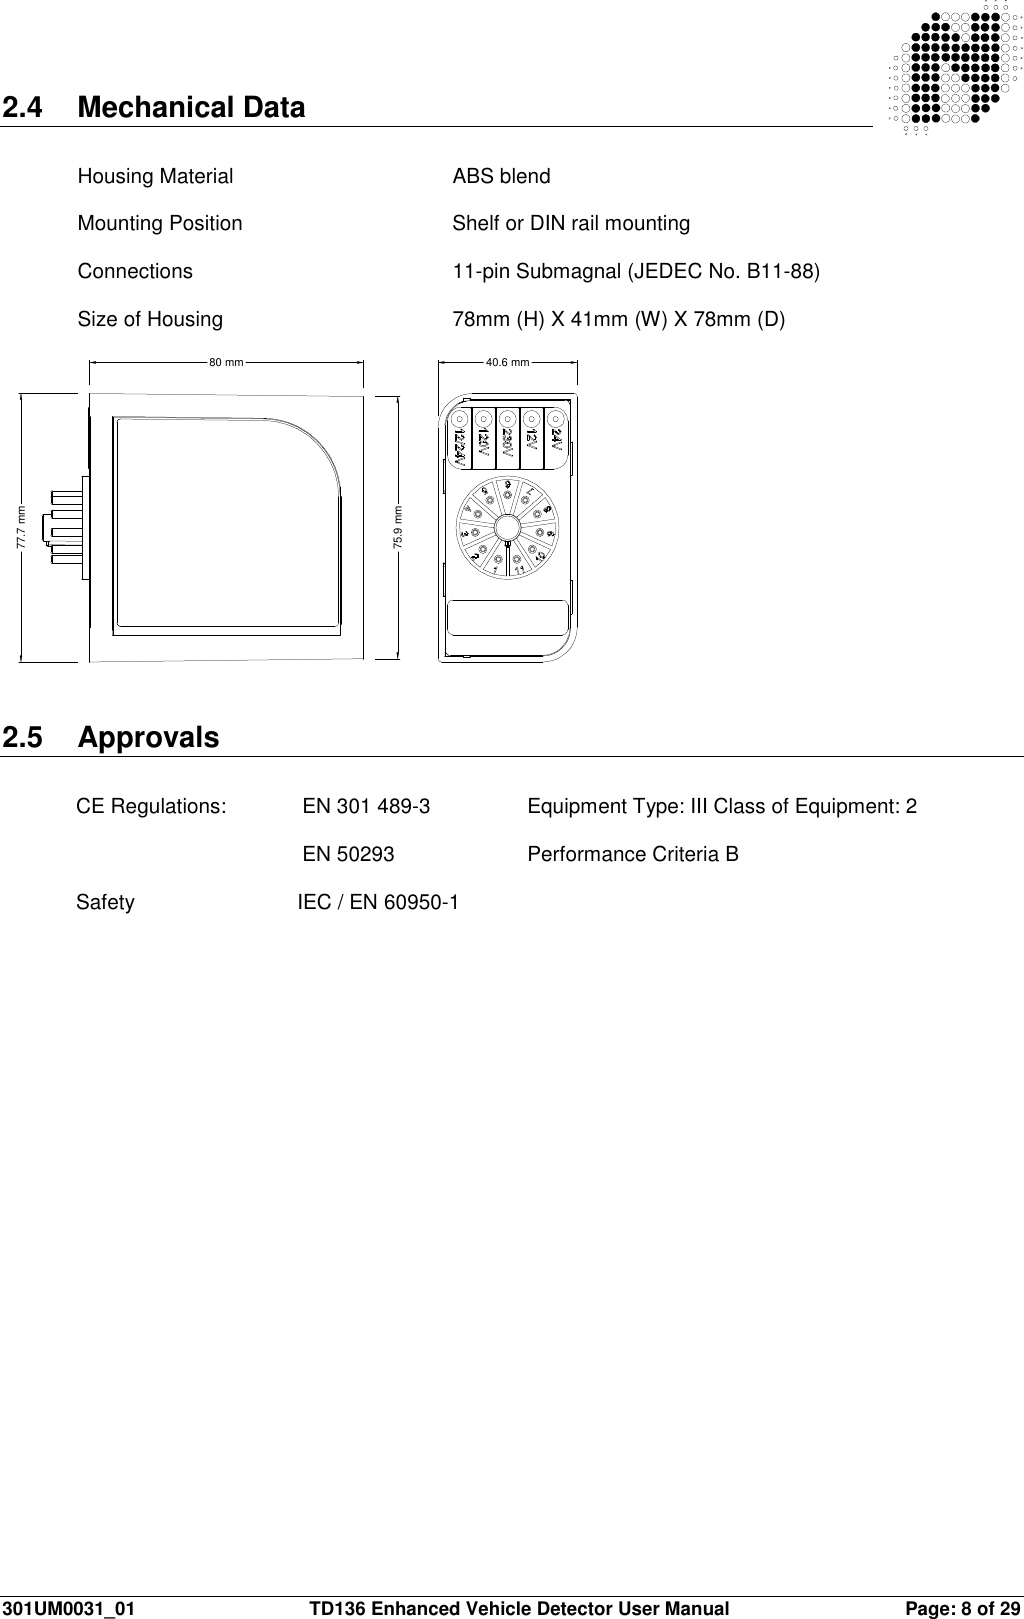  301UM0031_01  TD136 Enhanced Vehicle Detector User Manual  Page: 8 of 29  2.4  Mechanical Data   Housing Material      ABS blend   Mounting Position      Shelf or DIN rail mounting   Connections        11-pin Submagnal (JEDEC No. B11-88)   Size of Housing       78mm (H) X 41mm (W) X 78mm (D)  80 mm75.9 mm77.7 mm40.6 mm   2.5  Approvals  CE Regulations:   EN 301 489-3    Equipment Type: III Class of Equipment: 2         EN 50293    Performance Criteria B  Safety                            IEC / EN 60950-1                           